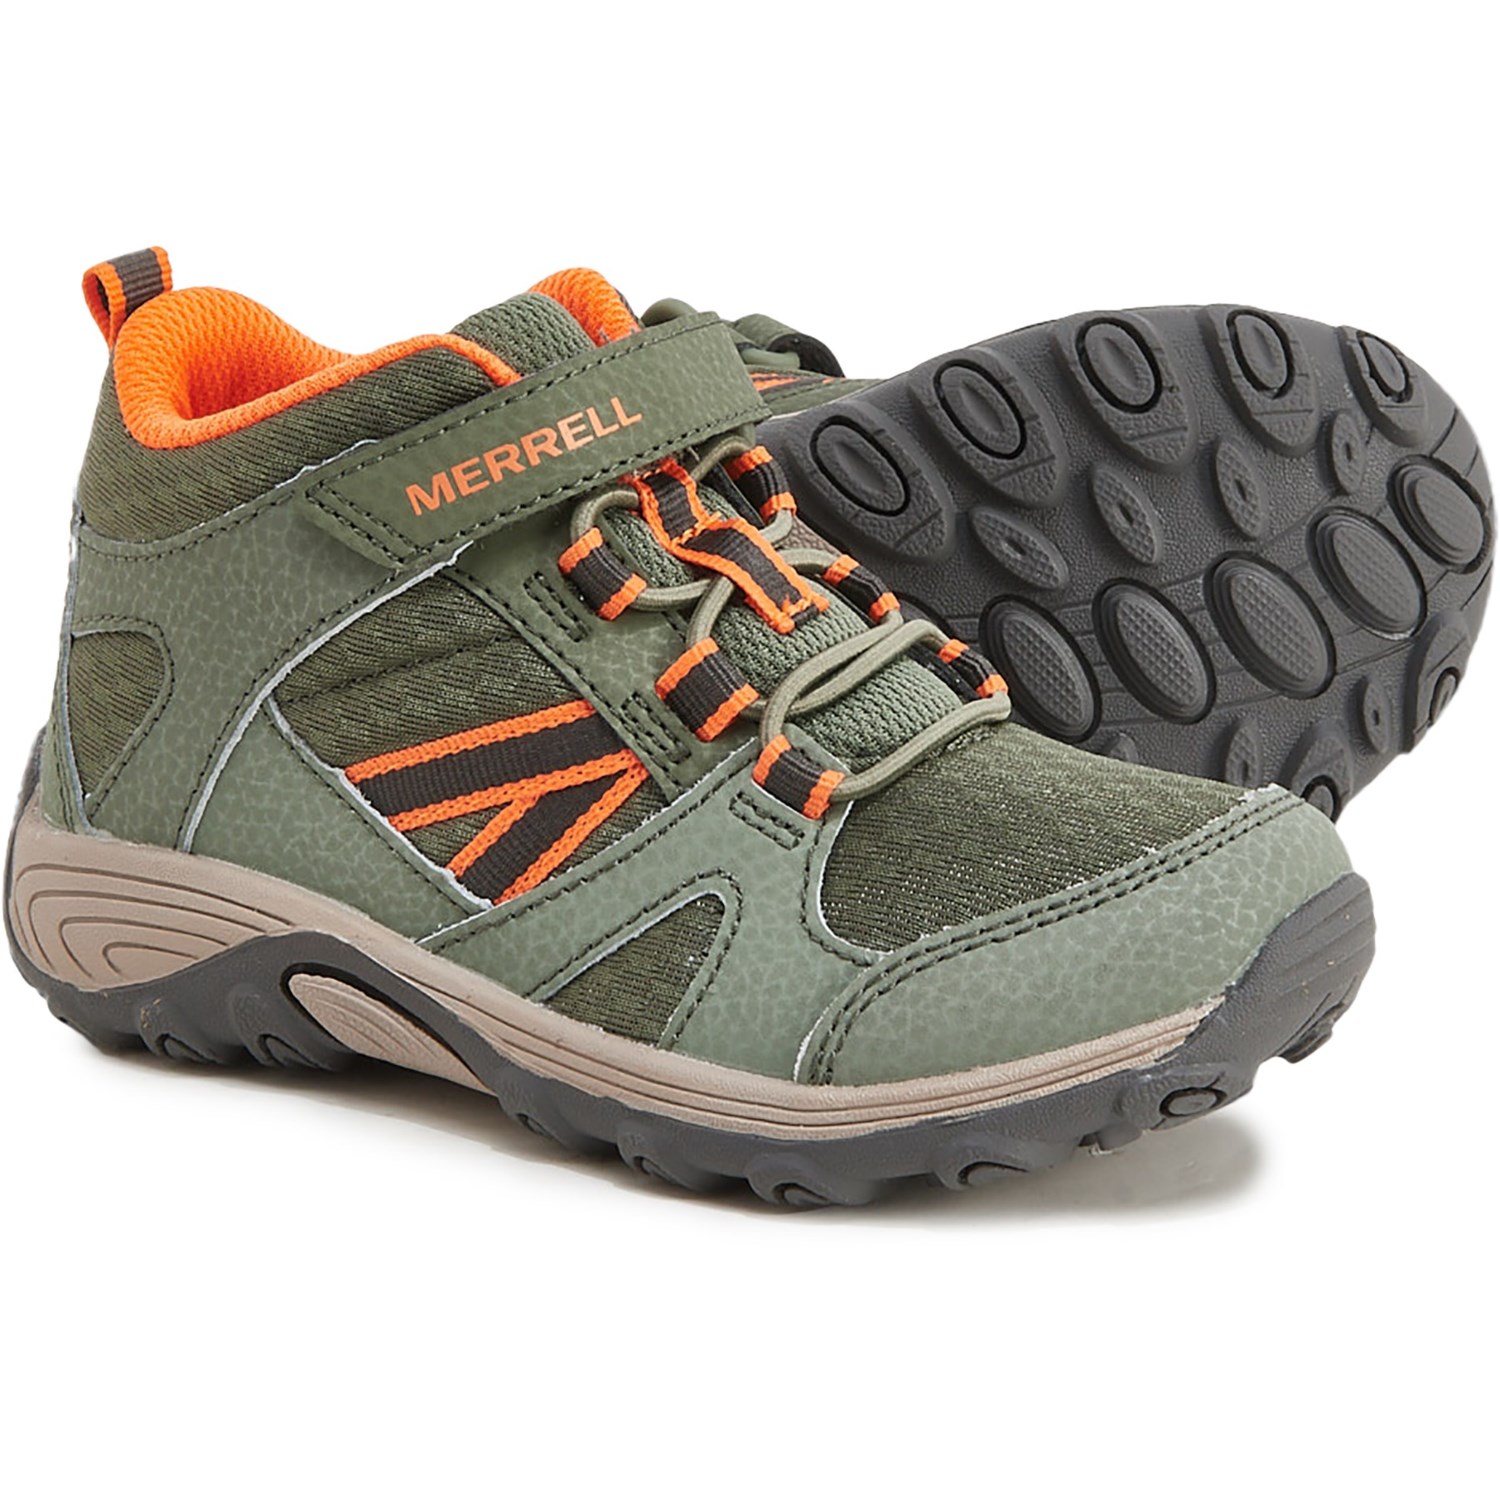 Merrell Boys Outback Mid Hiking Boots